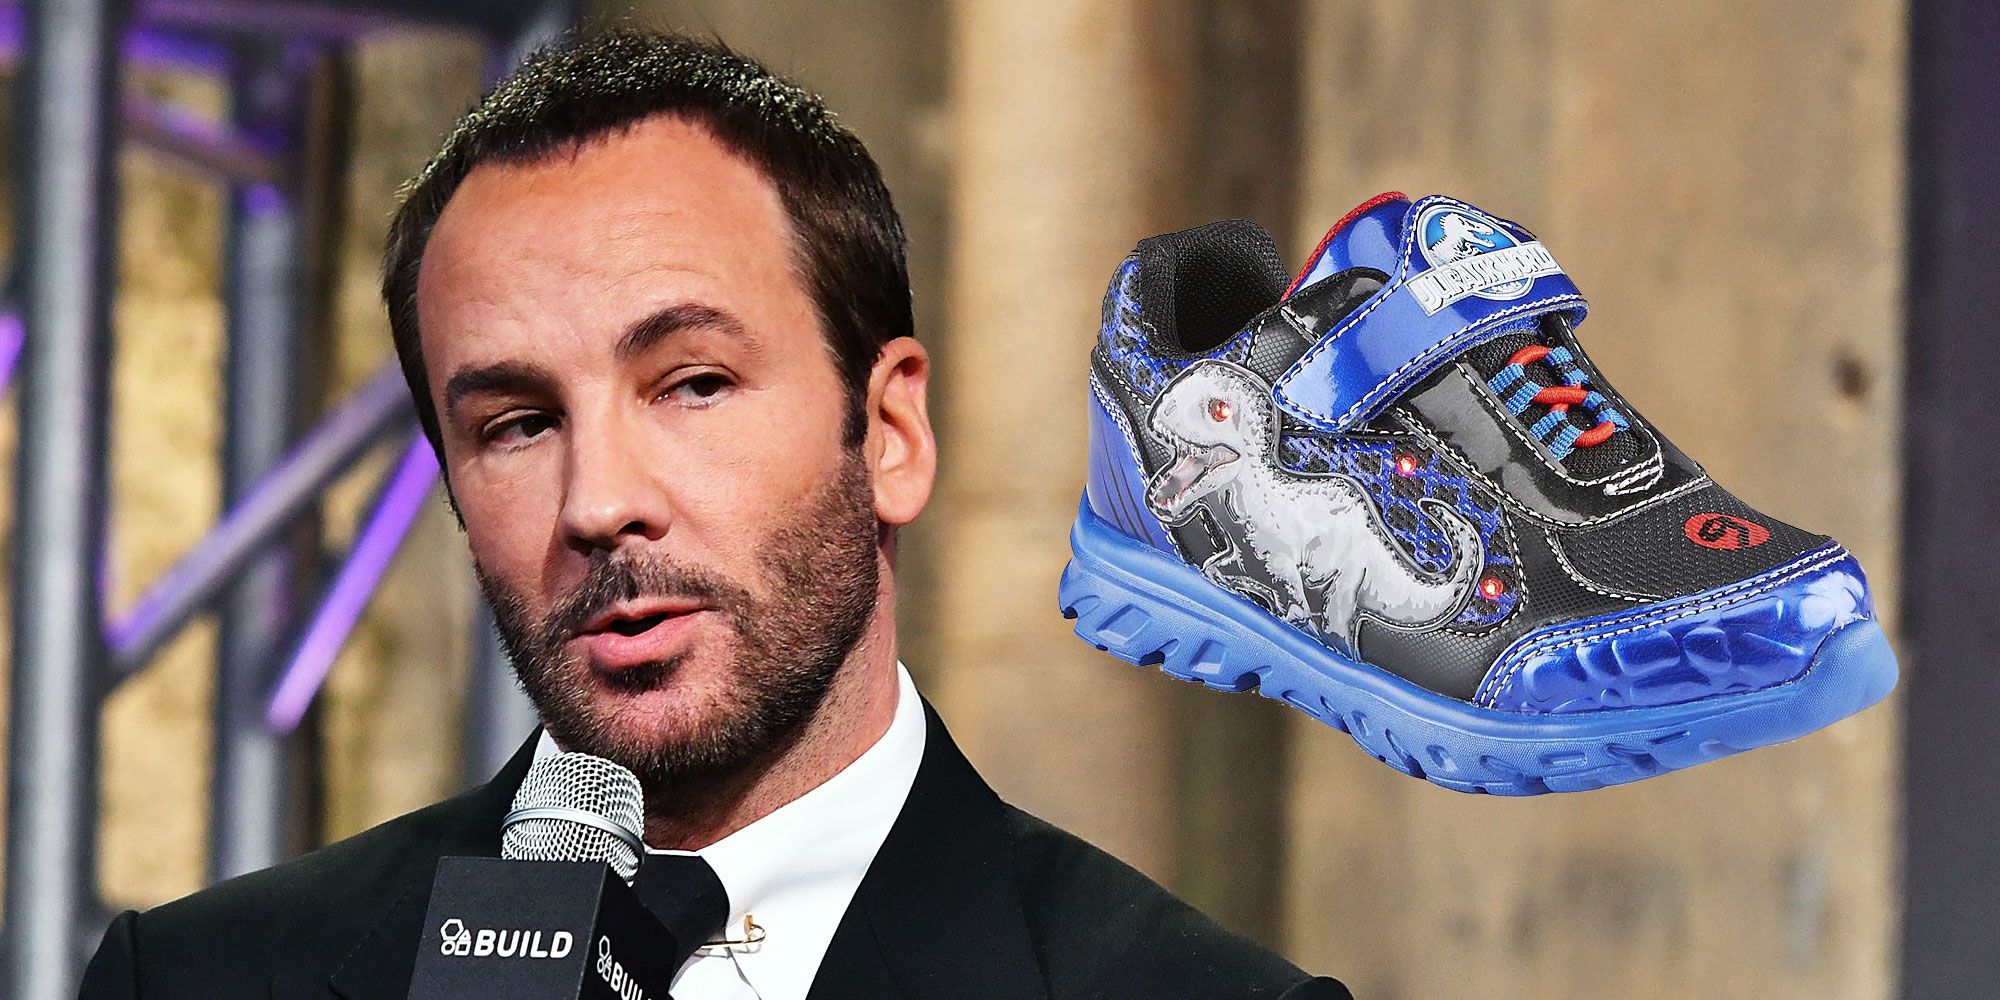 Tom Ford Tells His 4-Year-Old Son His Dinosaur Are "Tacky"